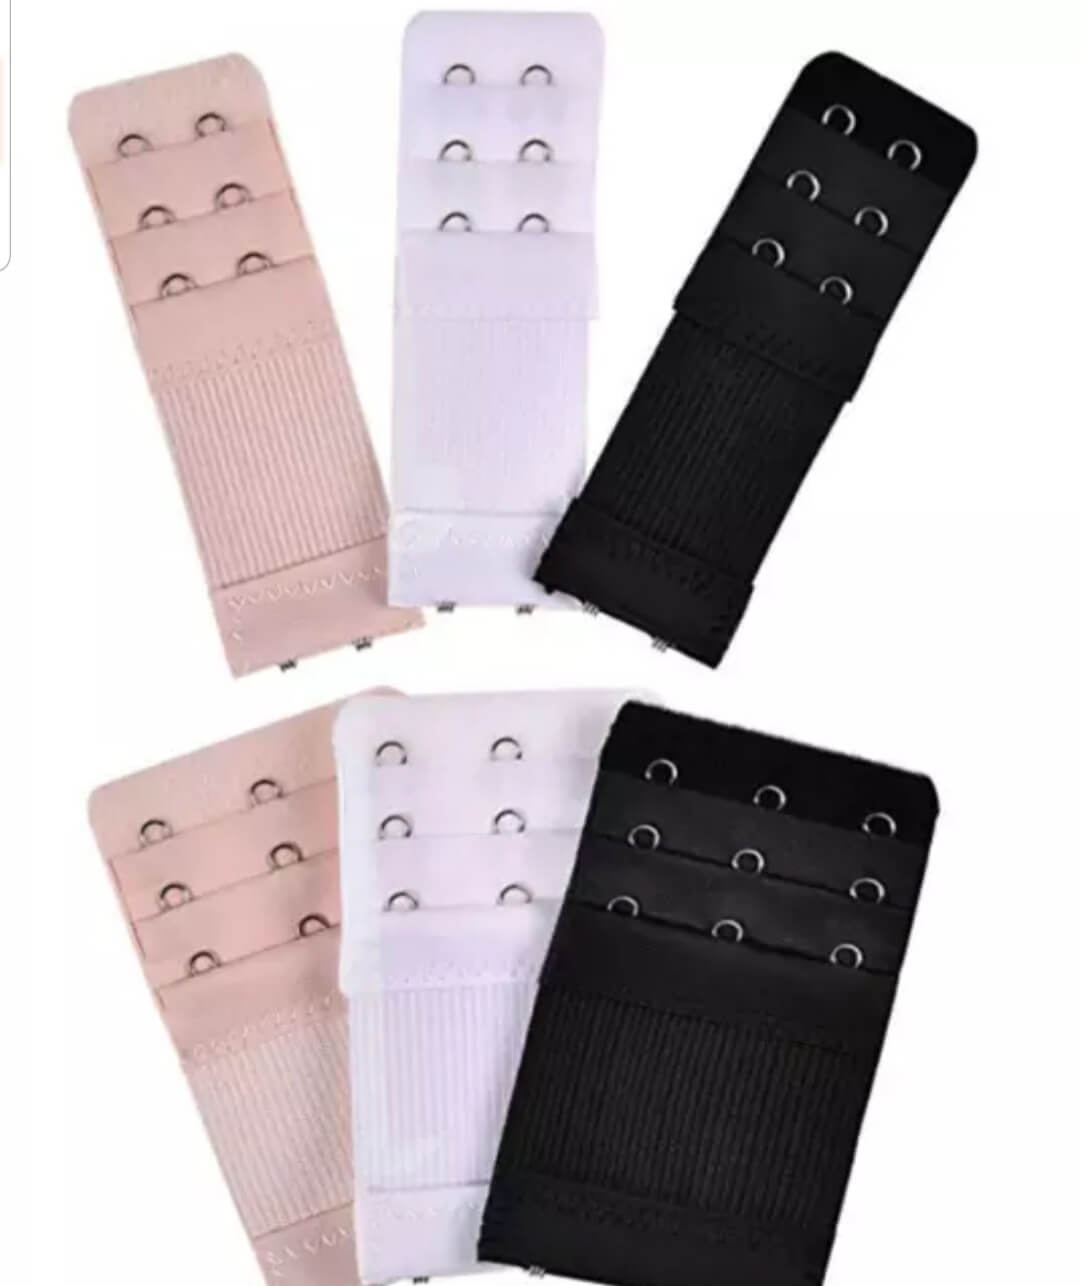 Bra Accessories for Women Bras Extender with 3-Hooks and 3-Rows Any Bra  Waist Band Extension Buckle for Ladies for Smaller Bras During Wait Gaining